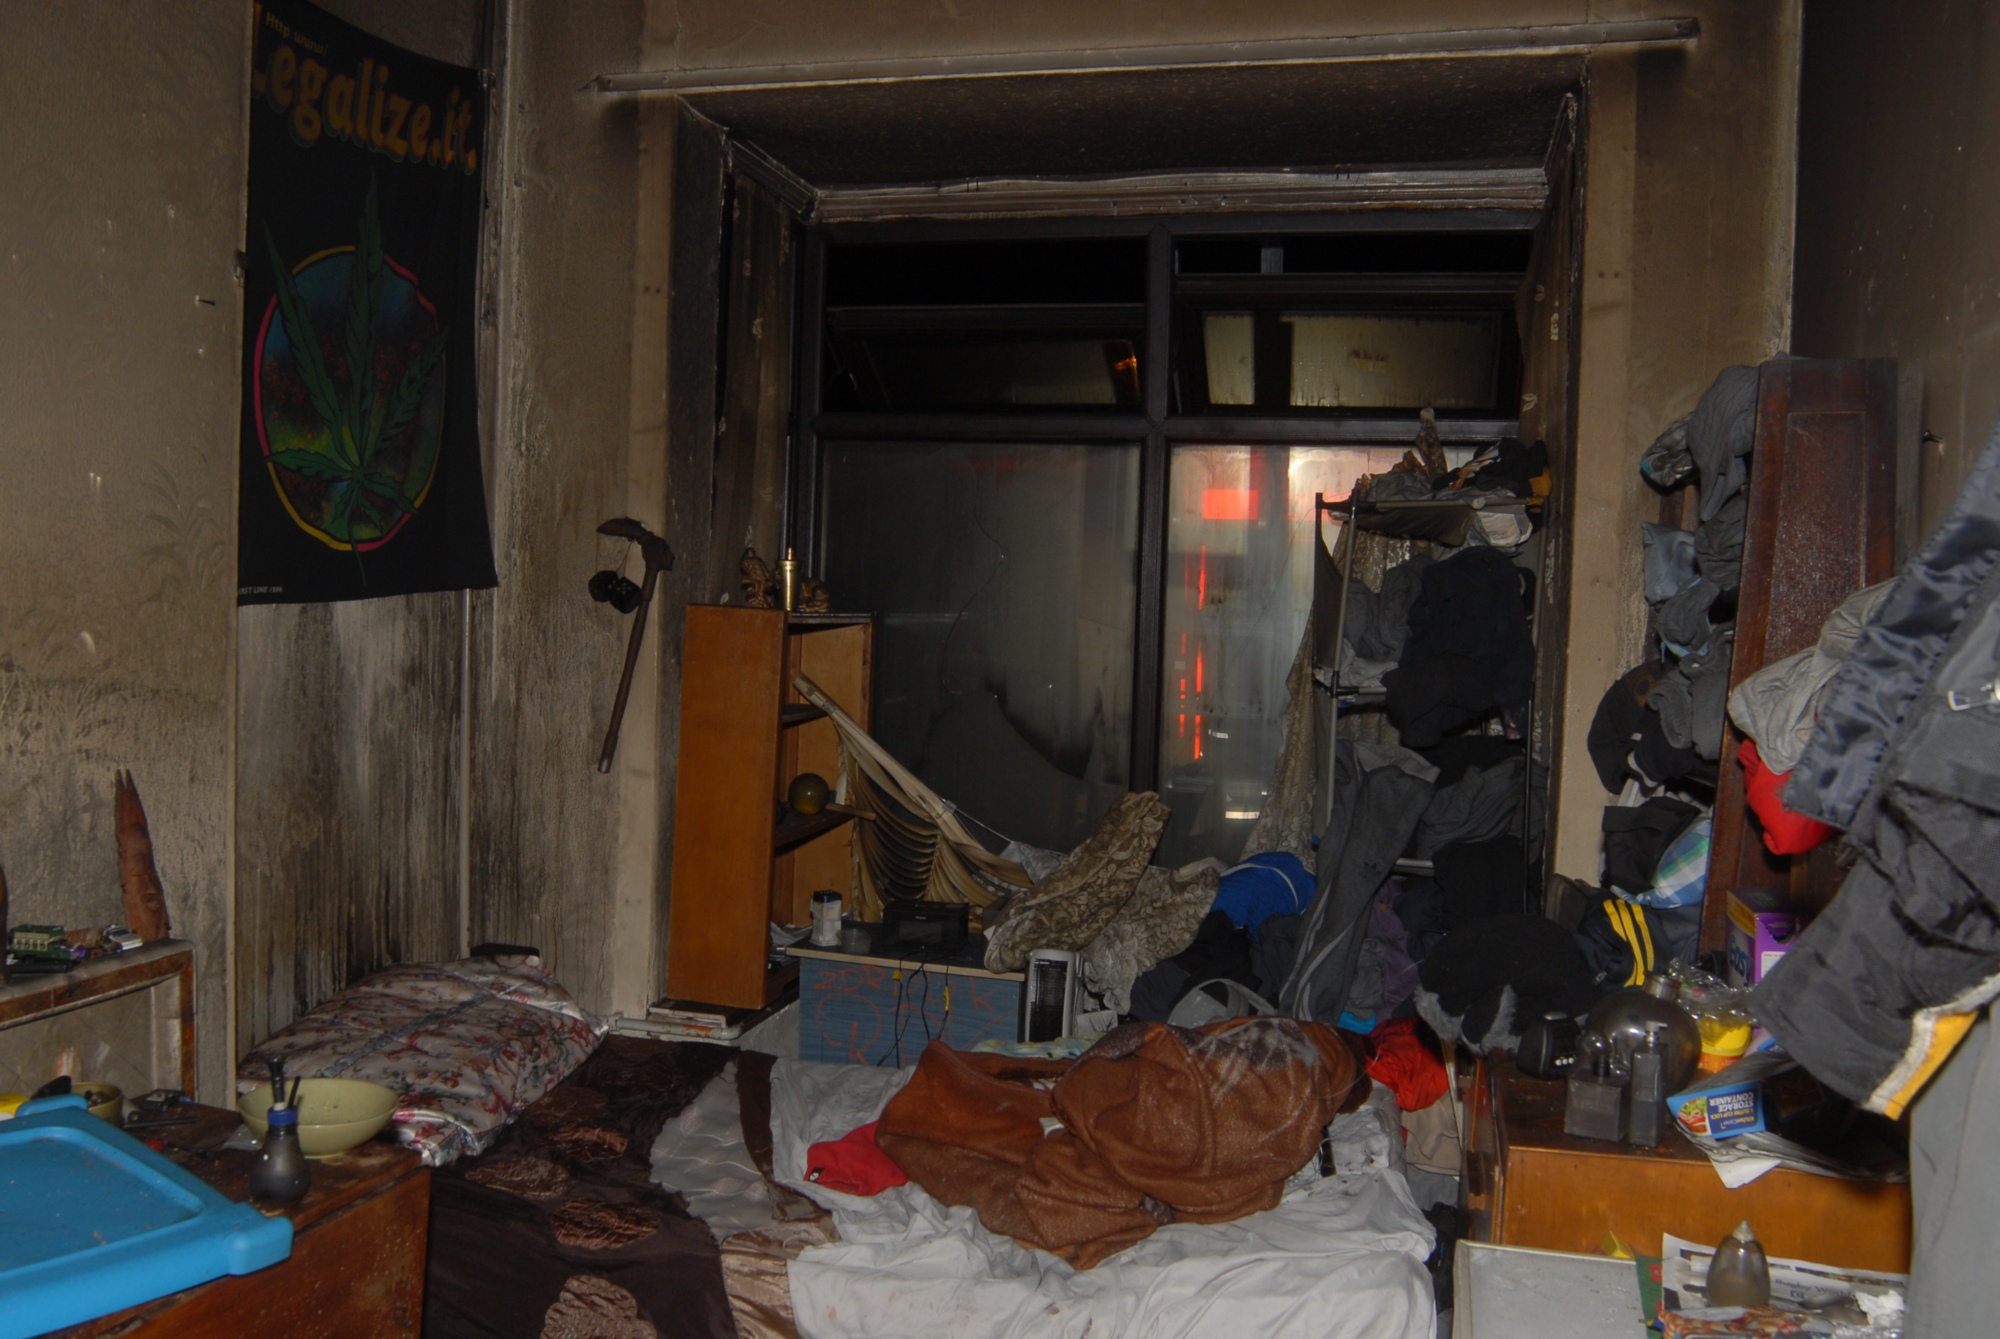 One of the victim's residences (Source: West Midlands Police)